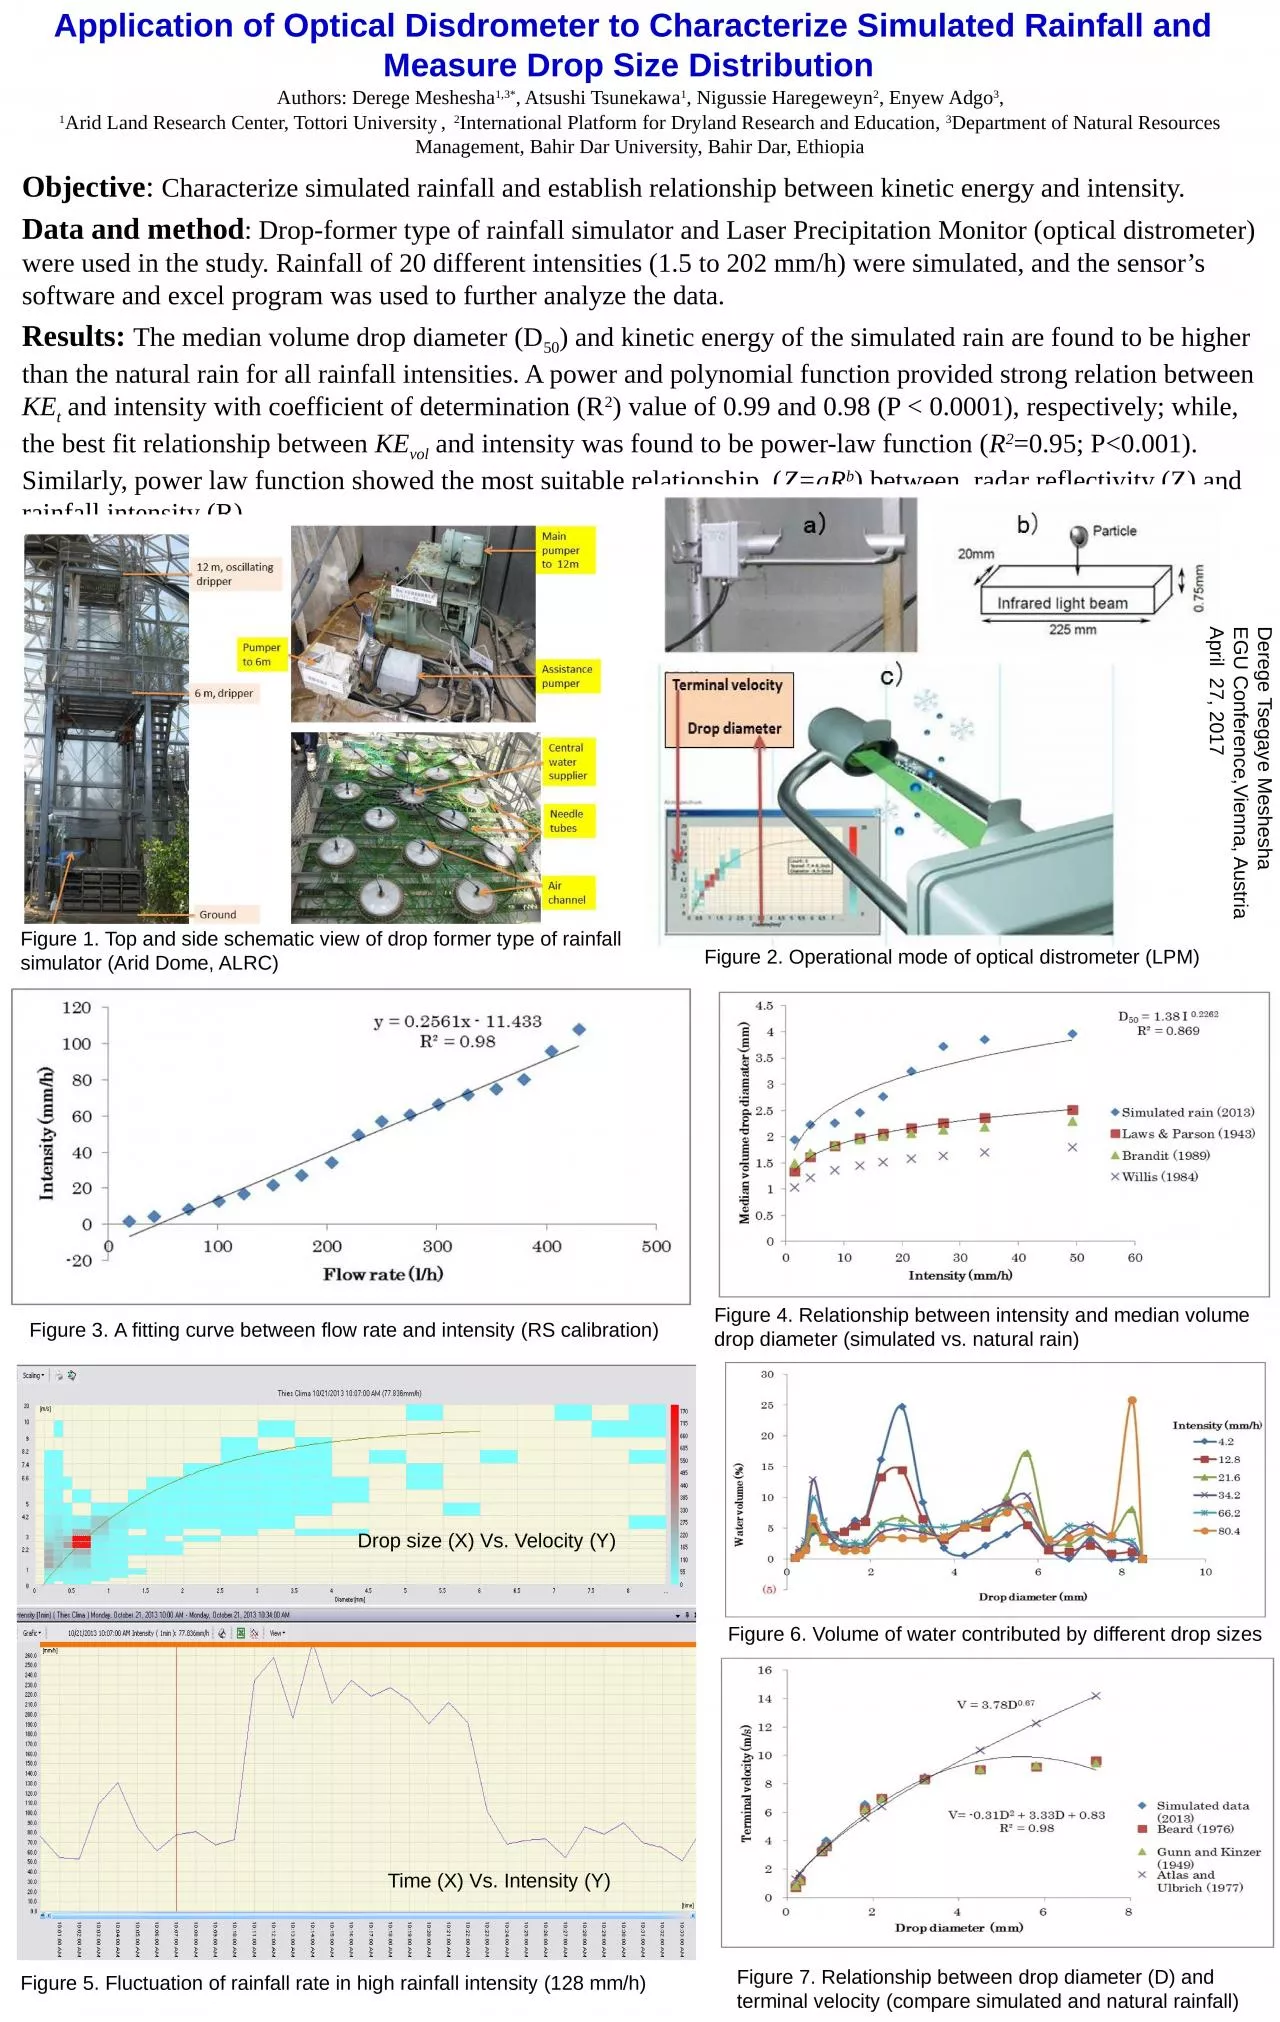 Application of Optical Disdrometer to Characterize Simulated Rainfall and Measure Drop